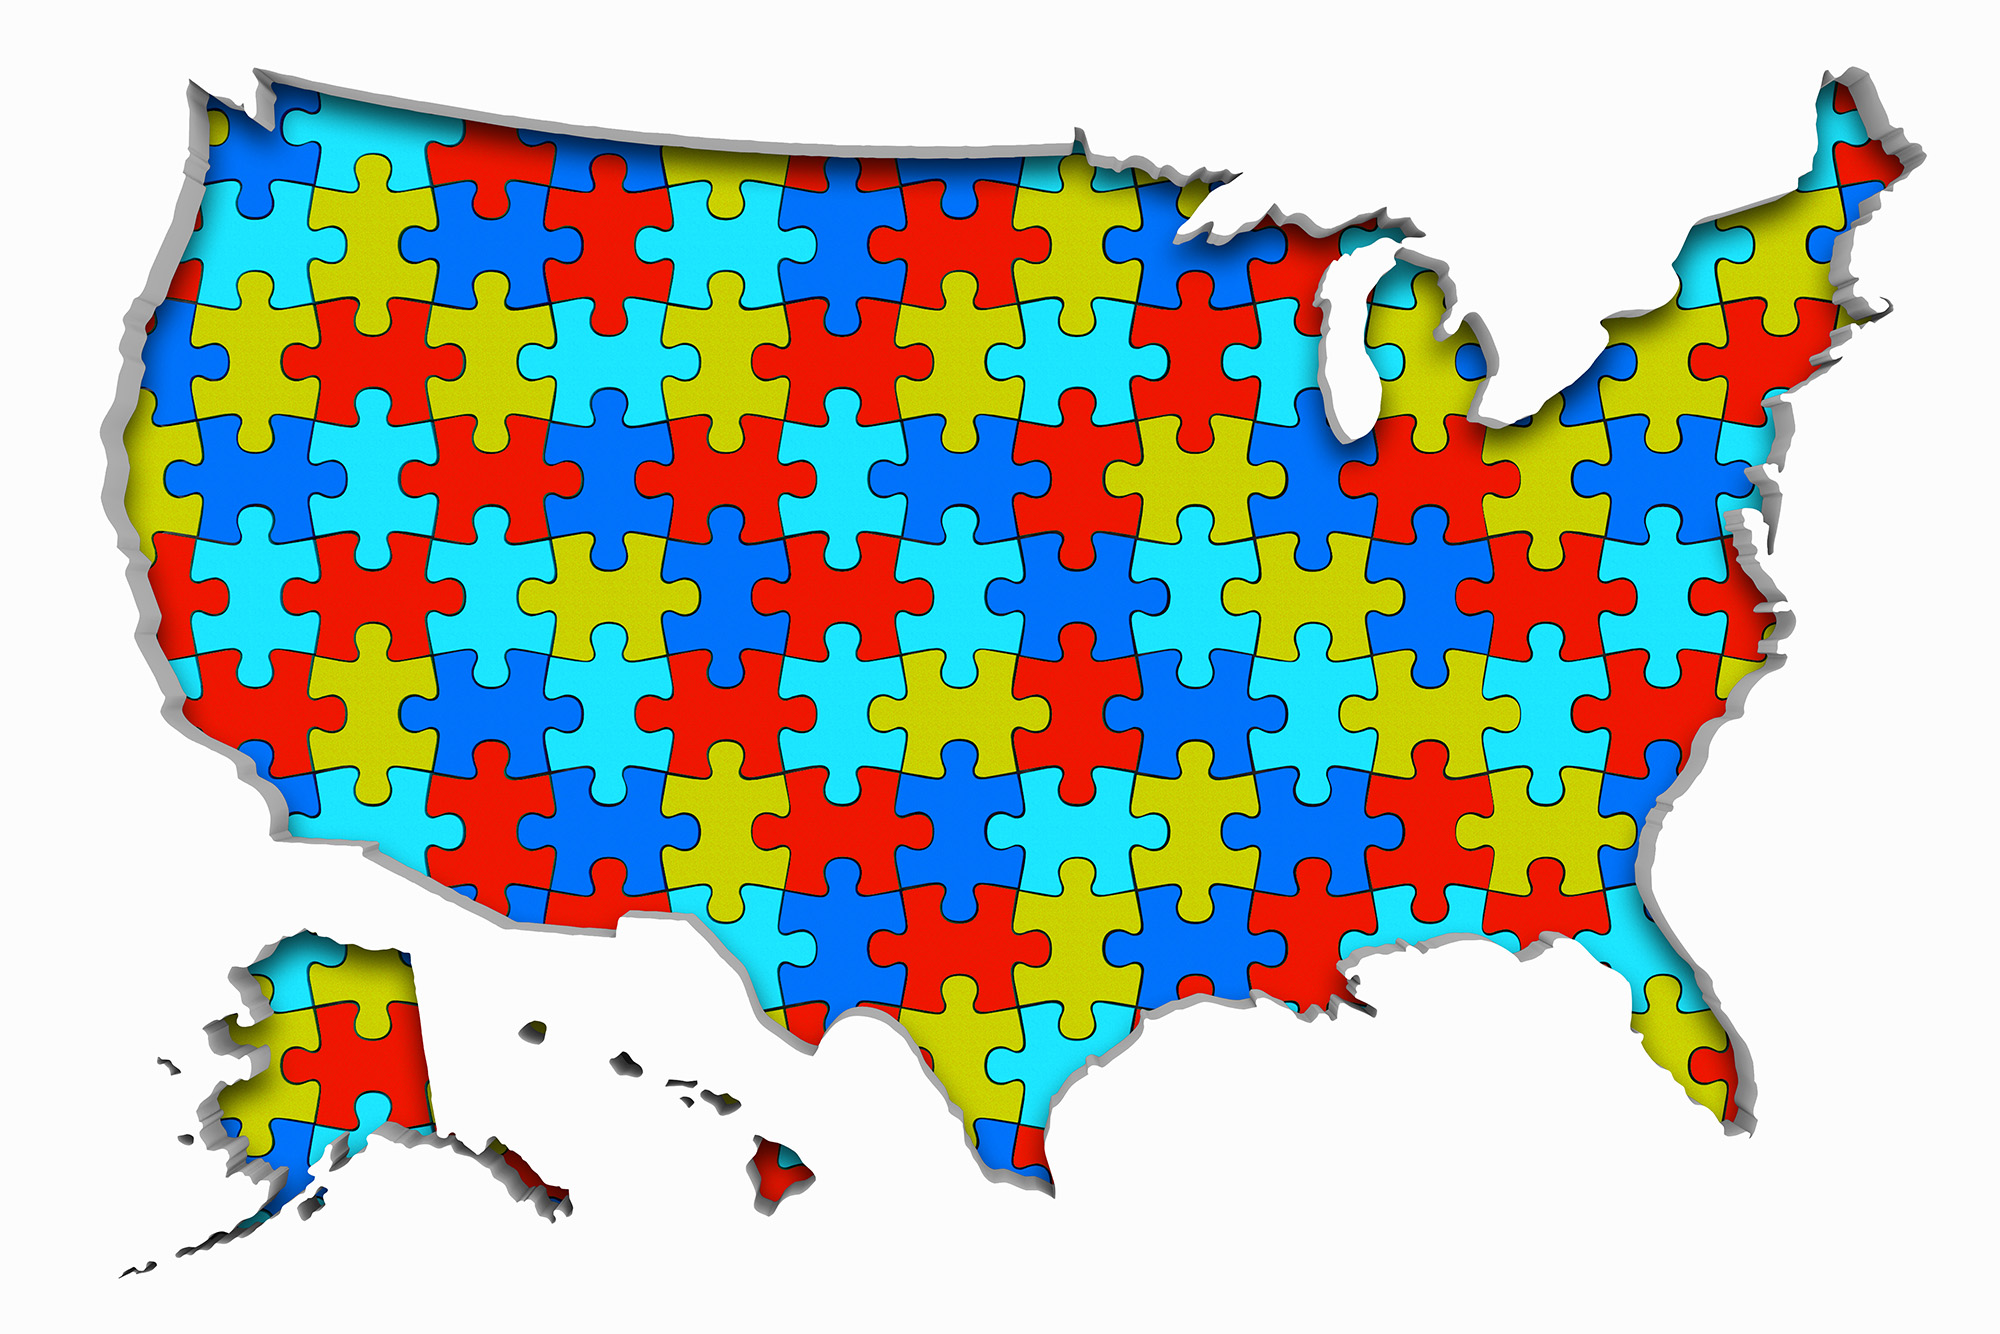 A stock illustration showing the U.S. made up of puzzle pieces to illustrate gerrymandering.